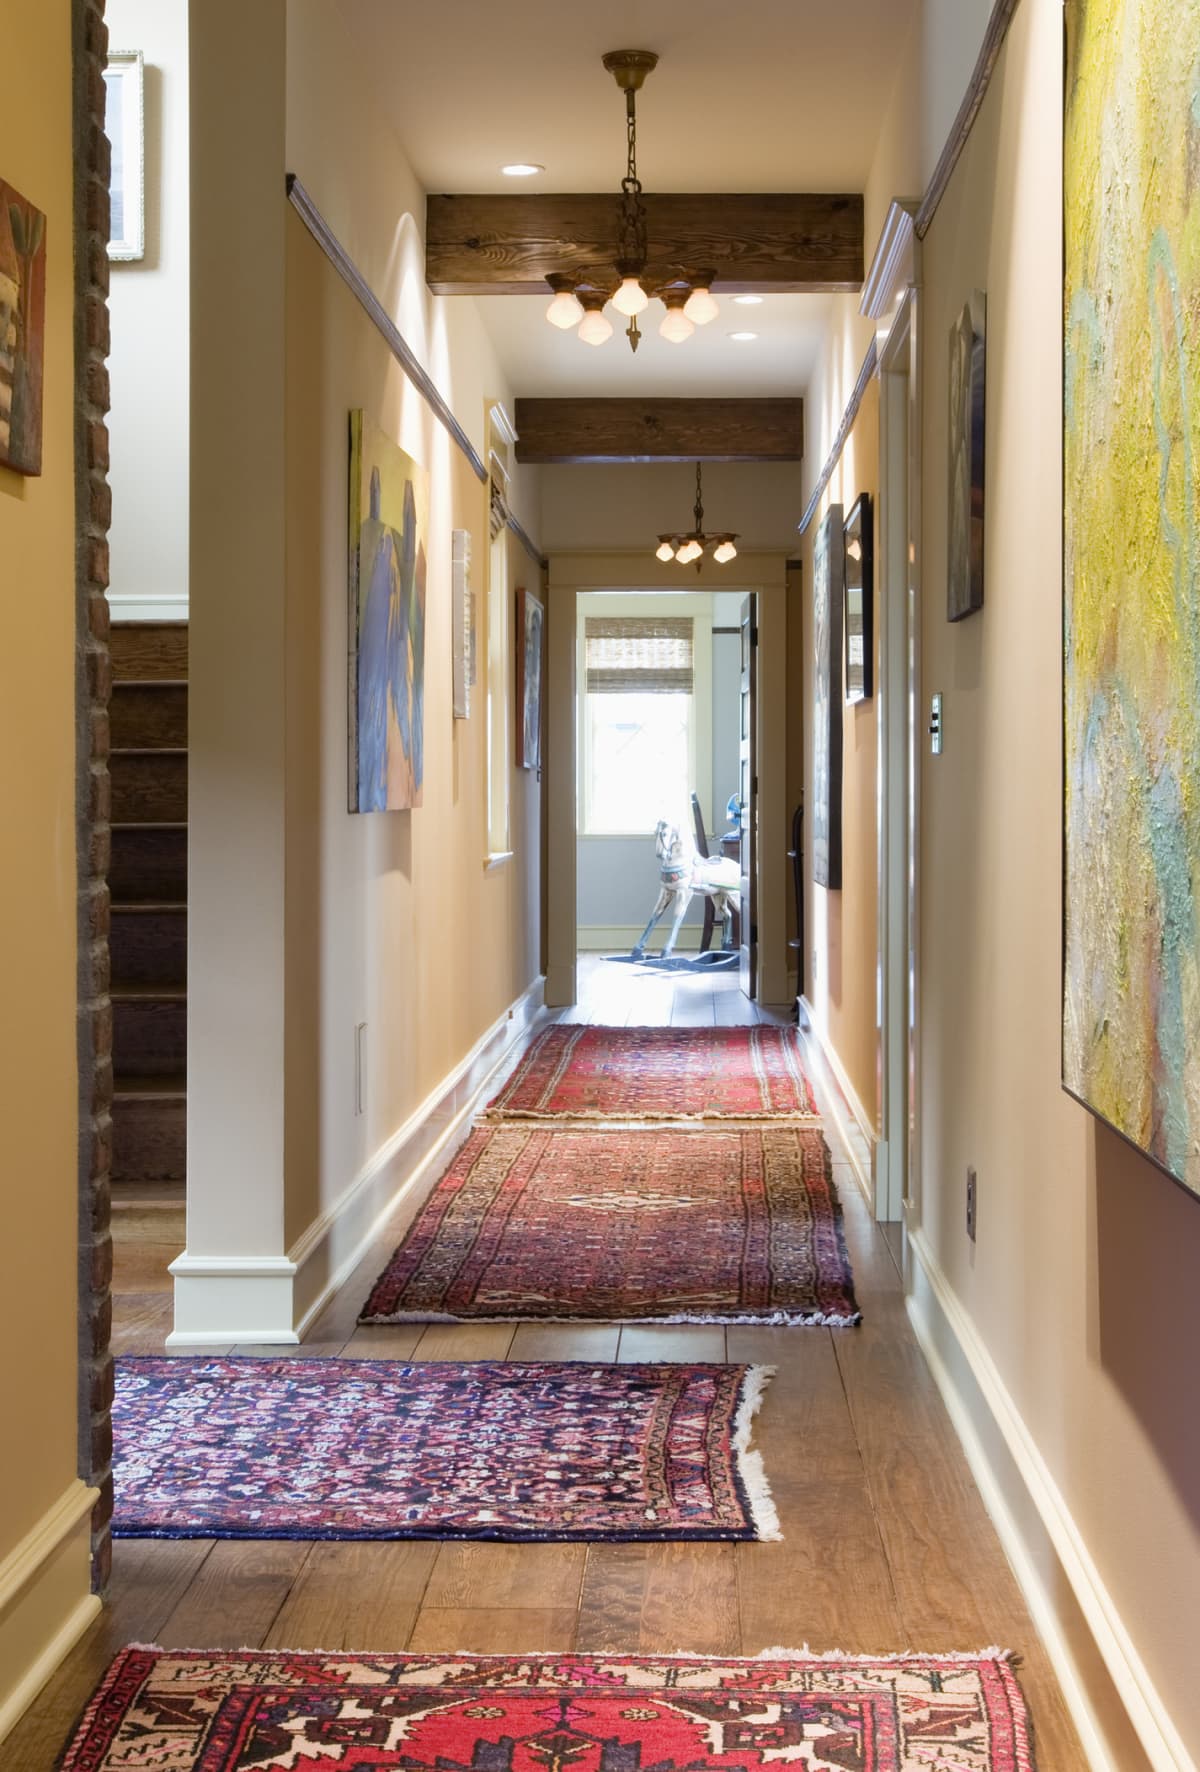 Hallway with rugs leading to a room with a rocking horse